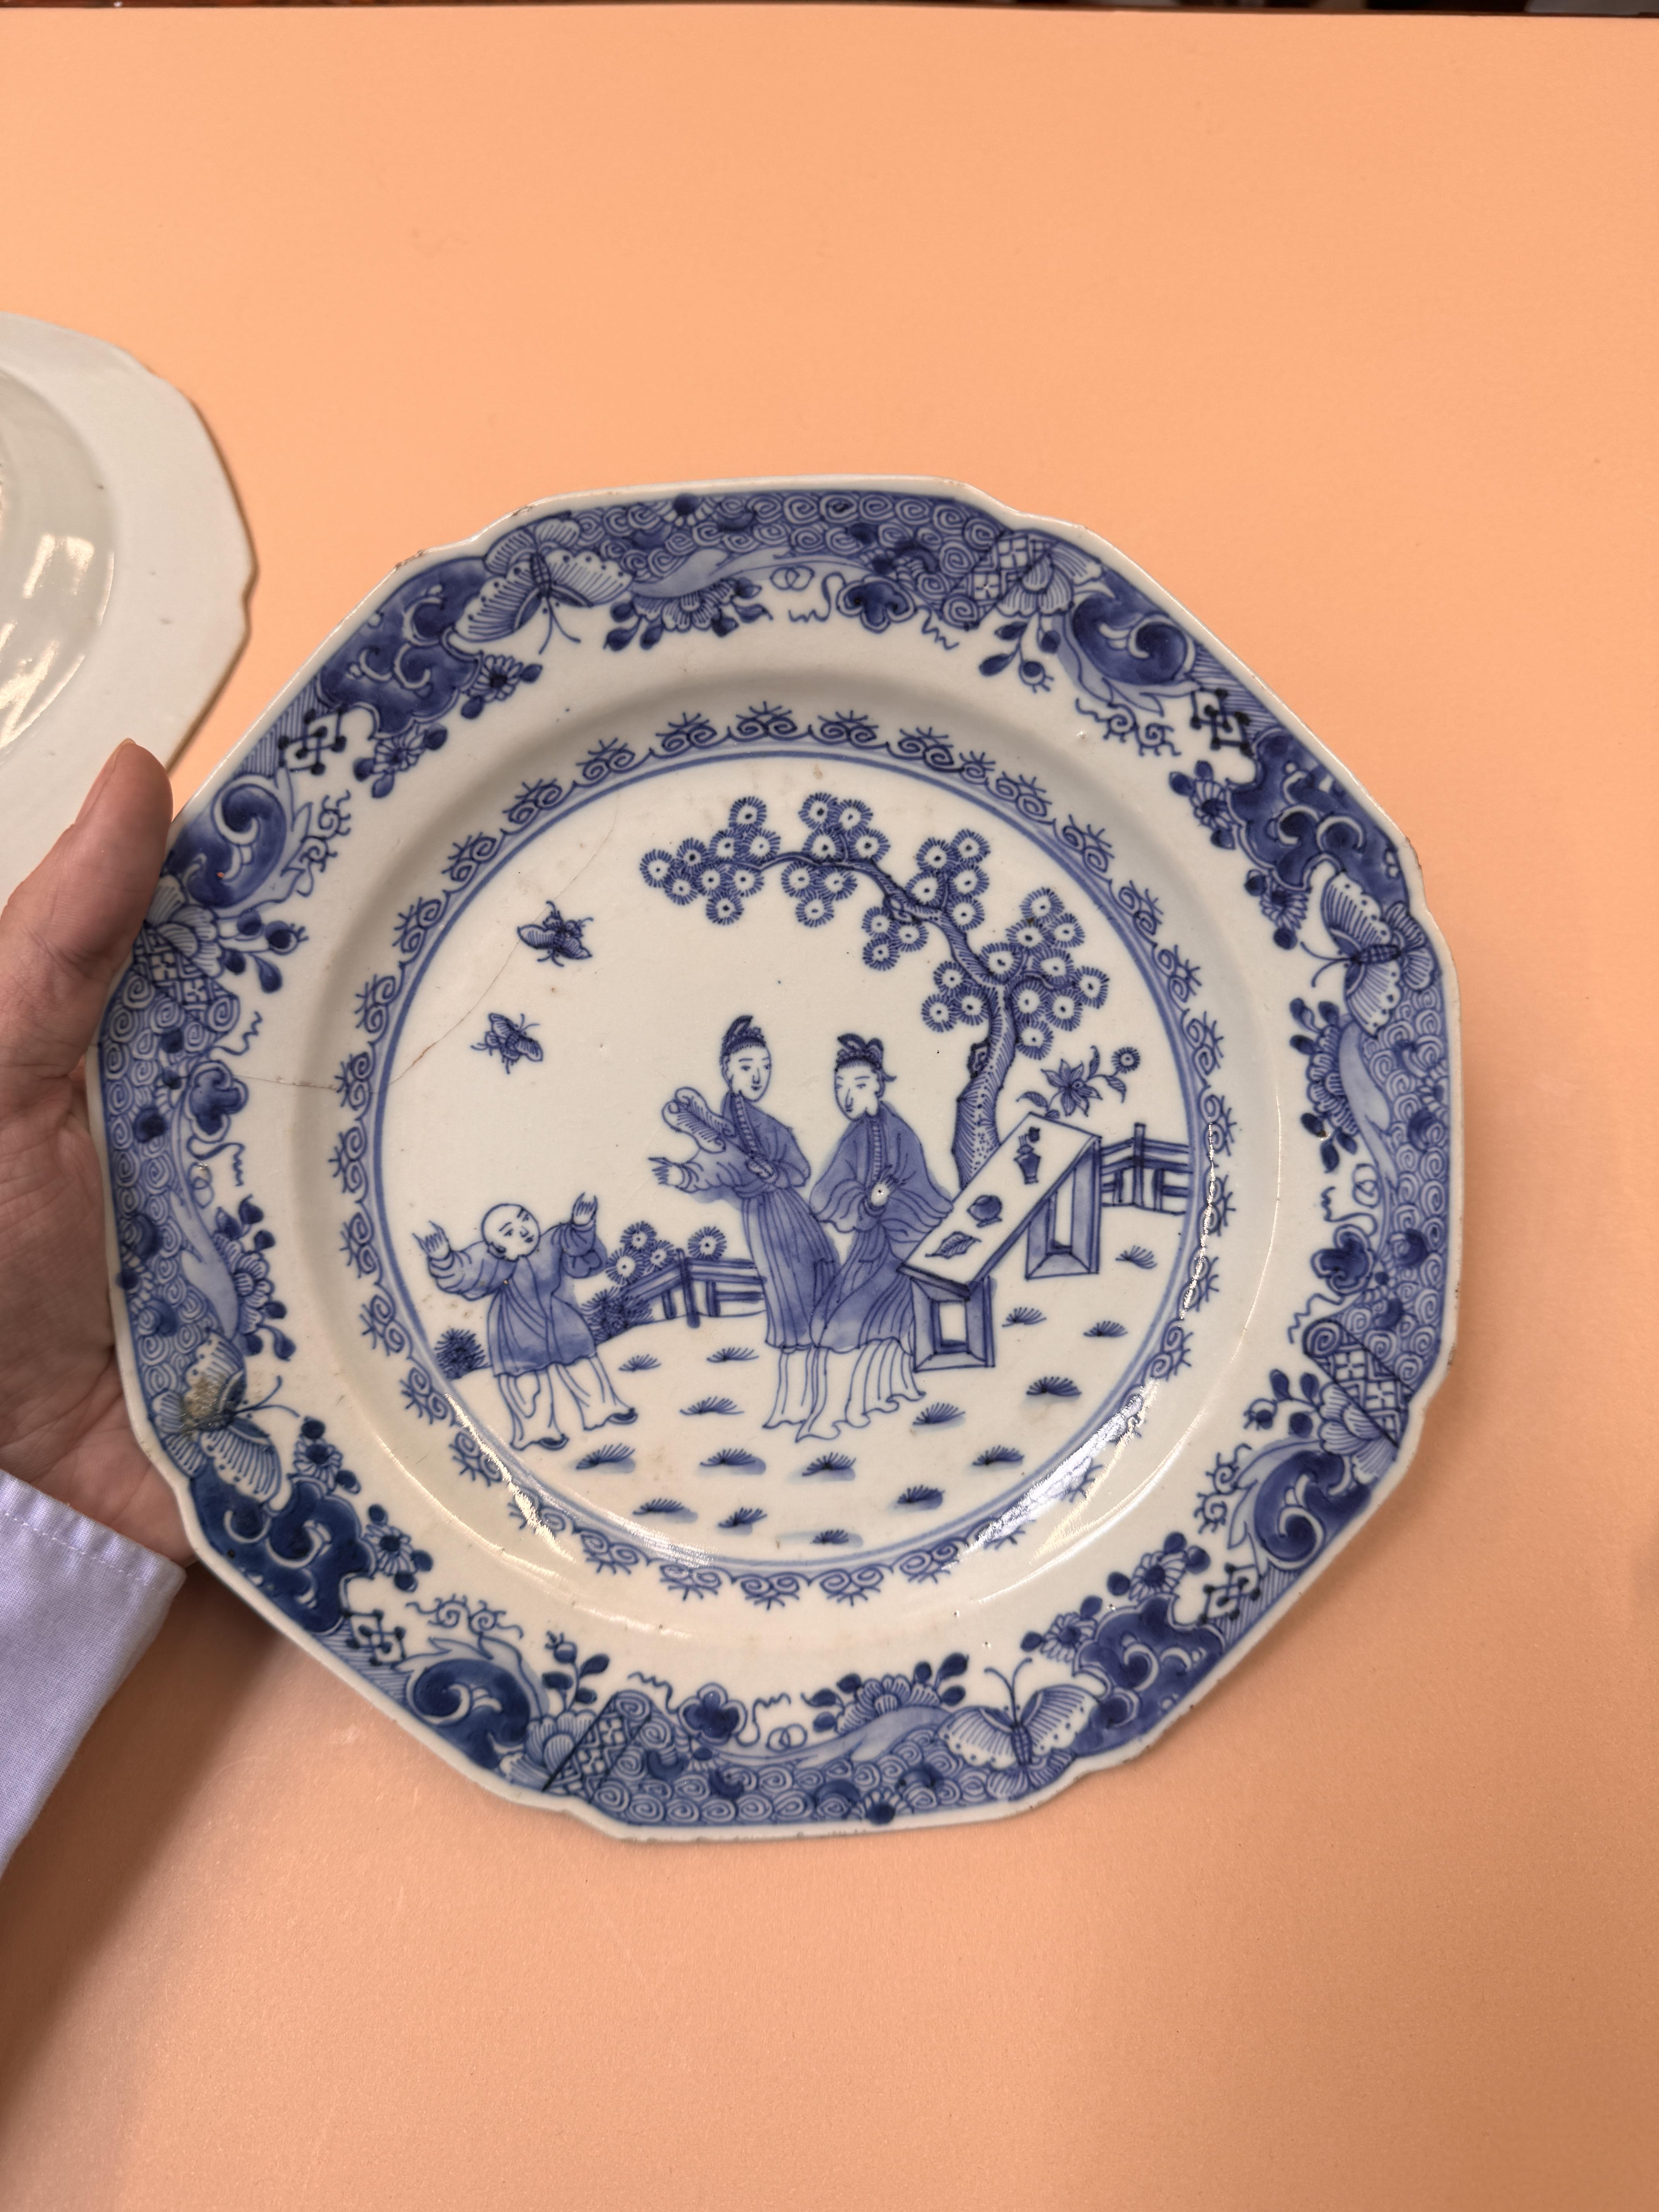 TWO CHINESE EXPORT BLUE AND WHITE DISHES 清十八世紀 外銷青花人物故事圖紋盤兩件 - Image 10 of 11